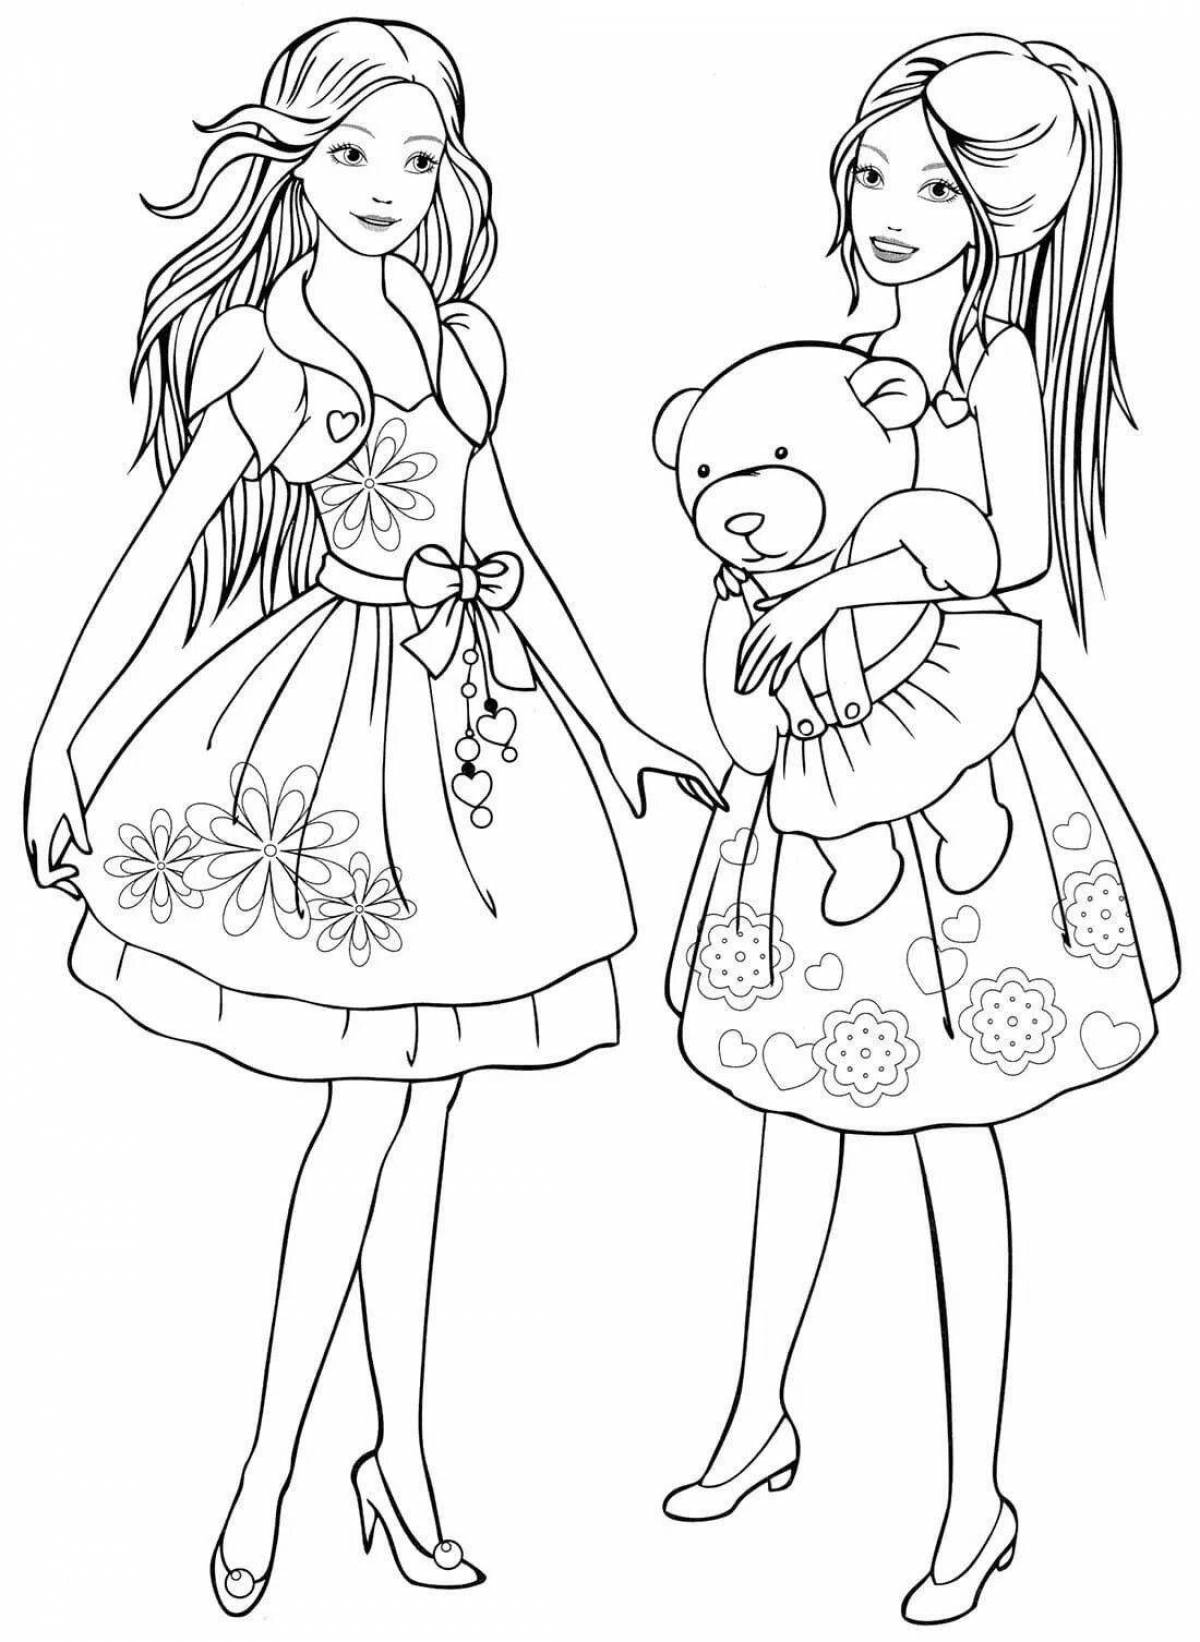 Colorful coloring pages for girls 12 years old